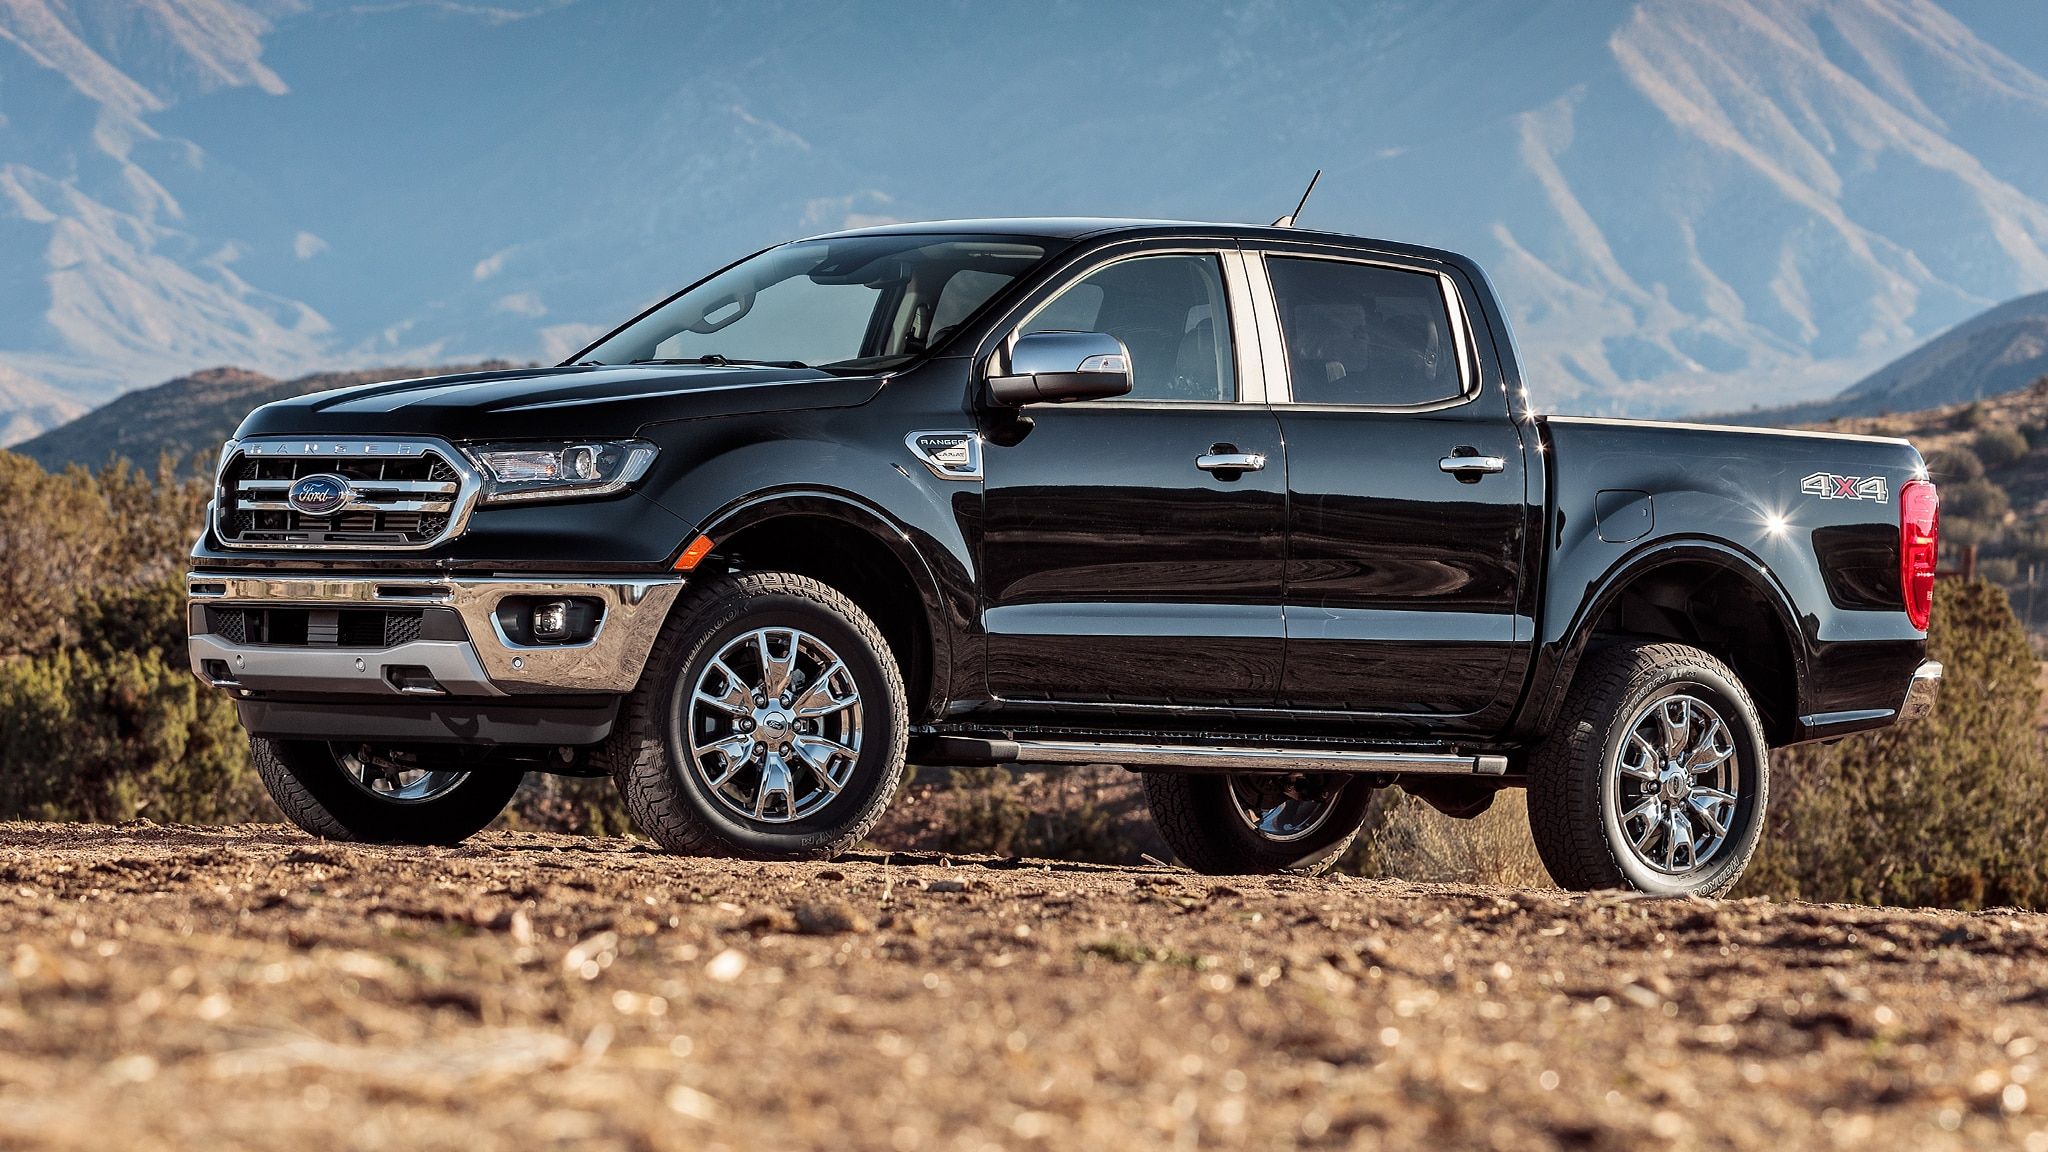 Ford Ranger Lariat Review: Already Approaching Its Expiration Date